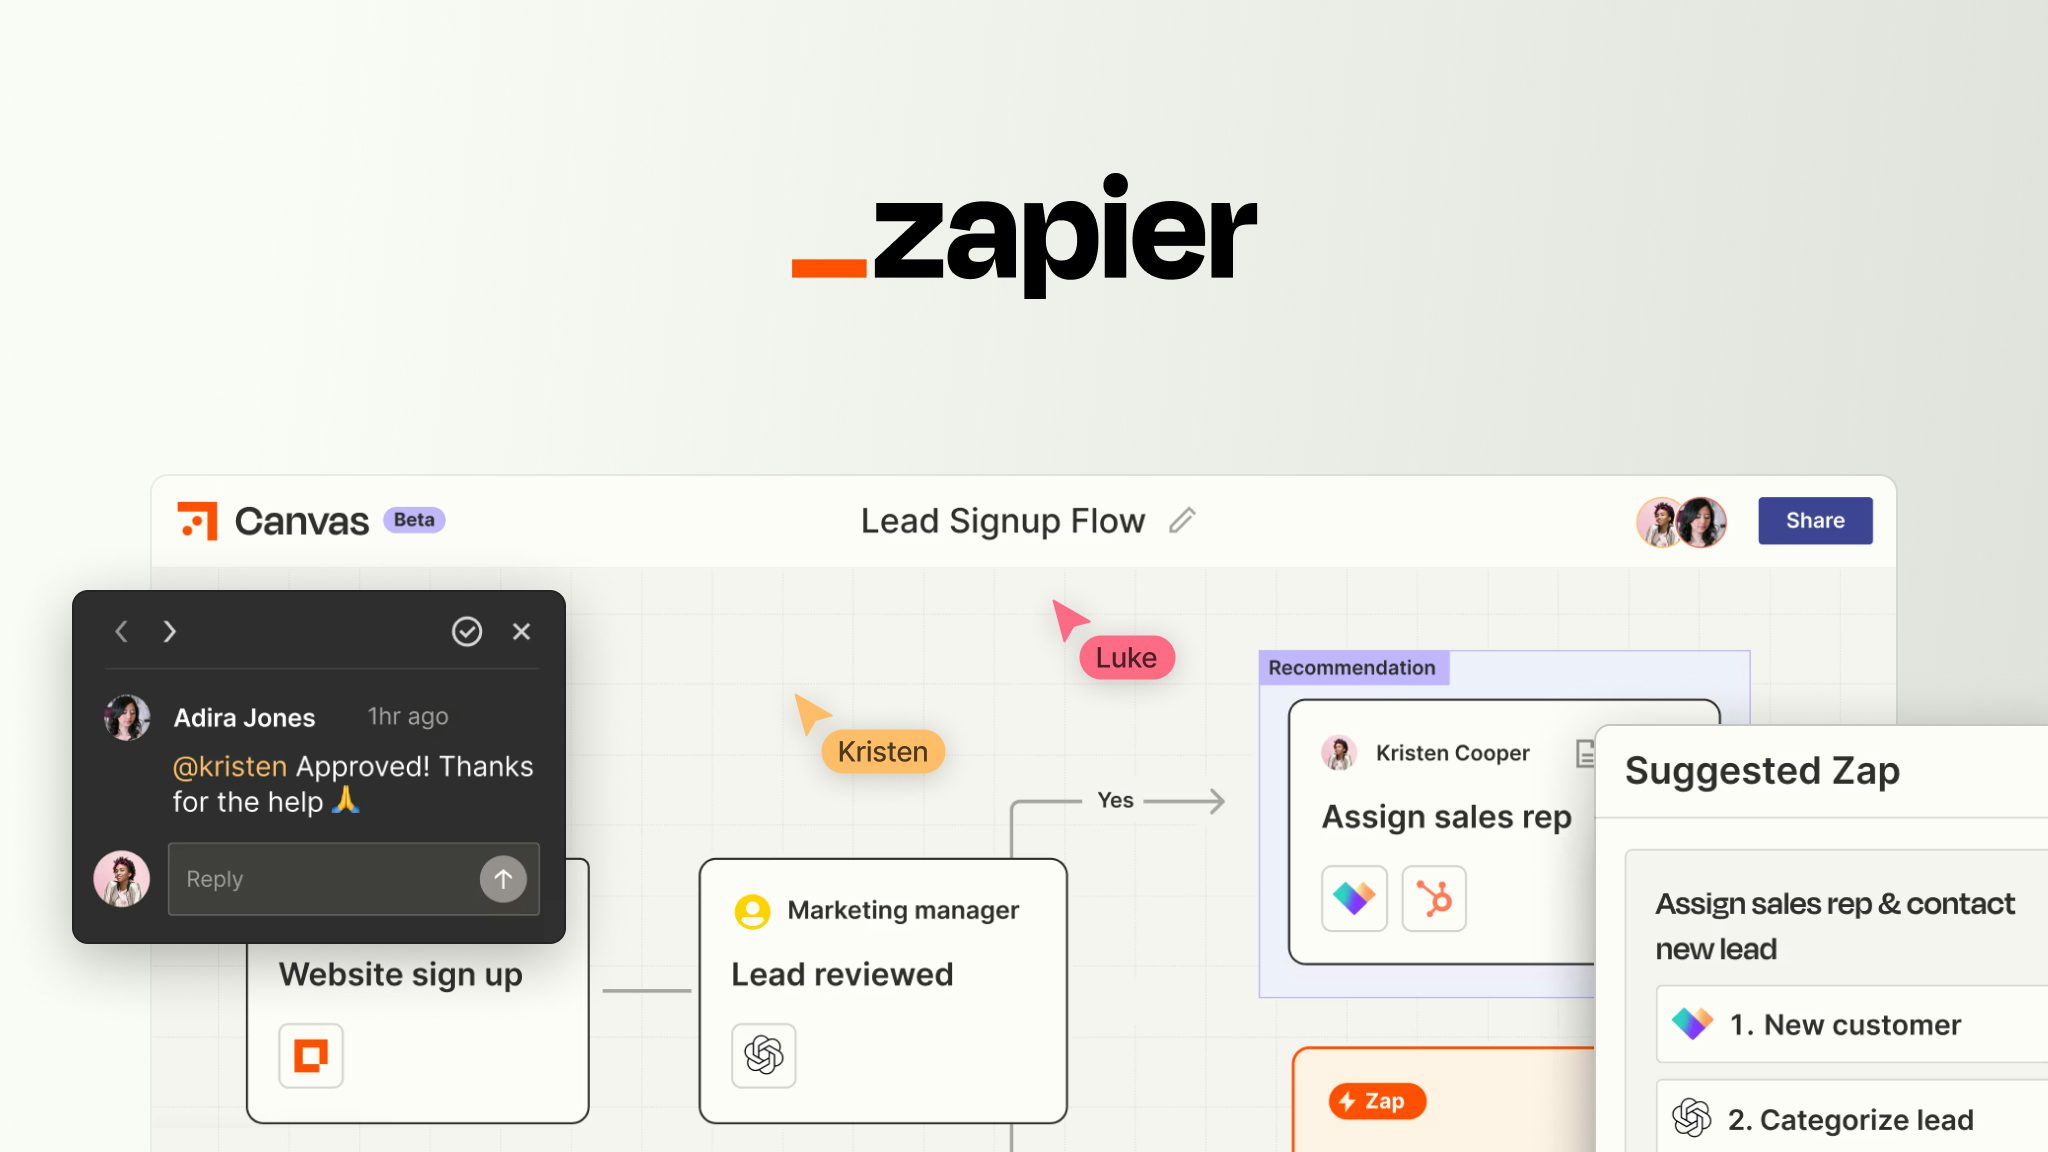 How Zapier added collaborative features to their Canvas product in just a couple of weeks